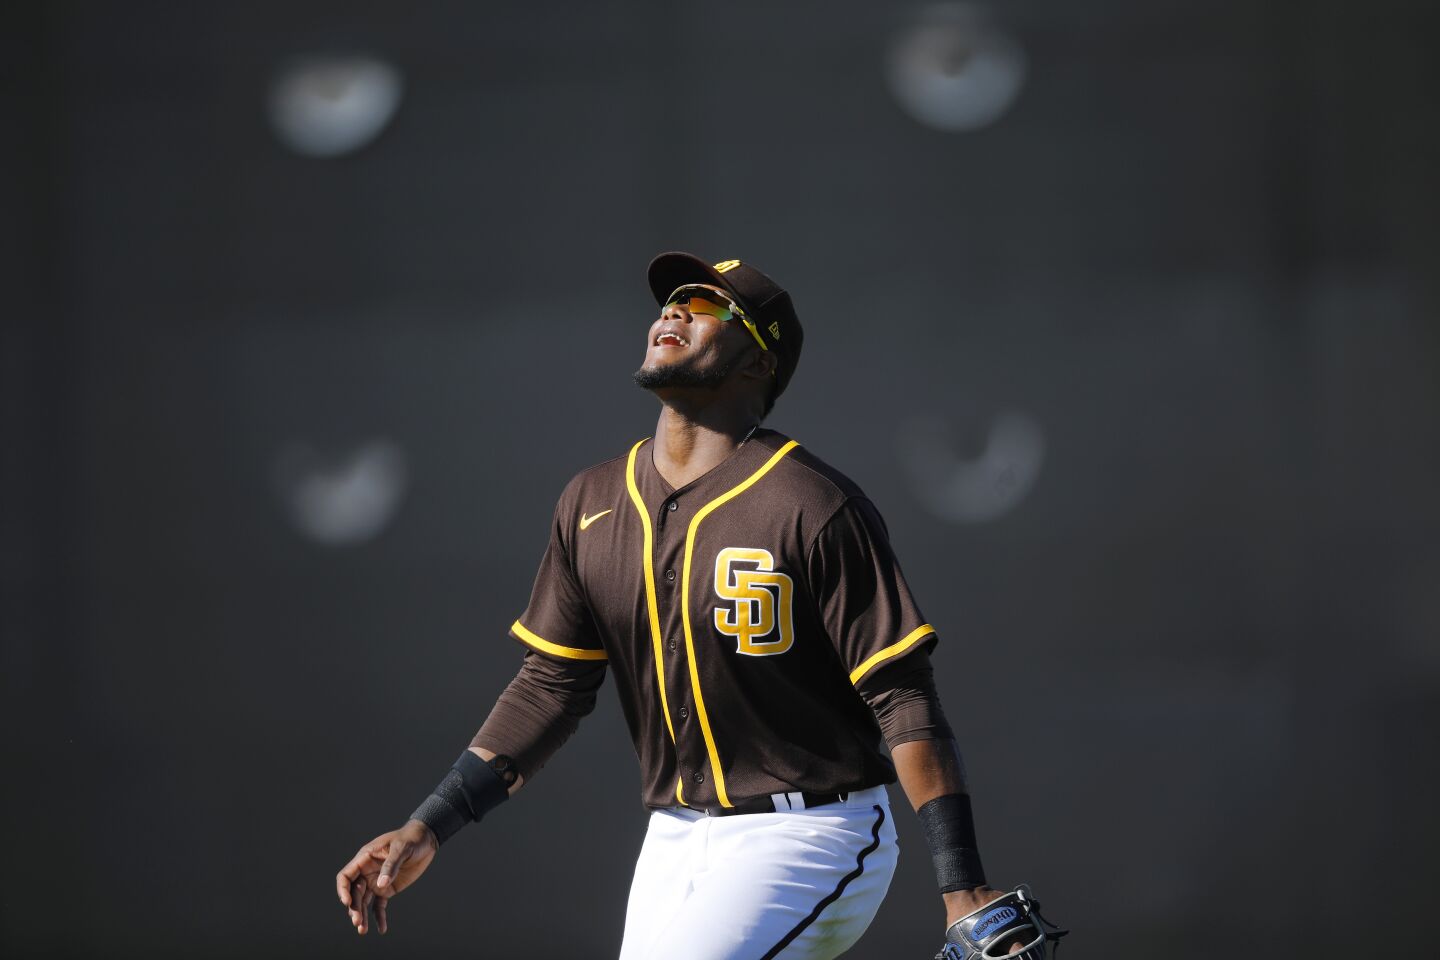 San Diego Padres Franchy Cordero watches a fly ball during a spring training practice on Feb. 20, 2020.